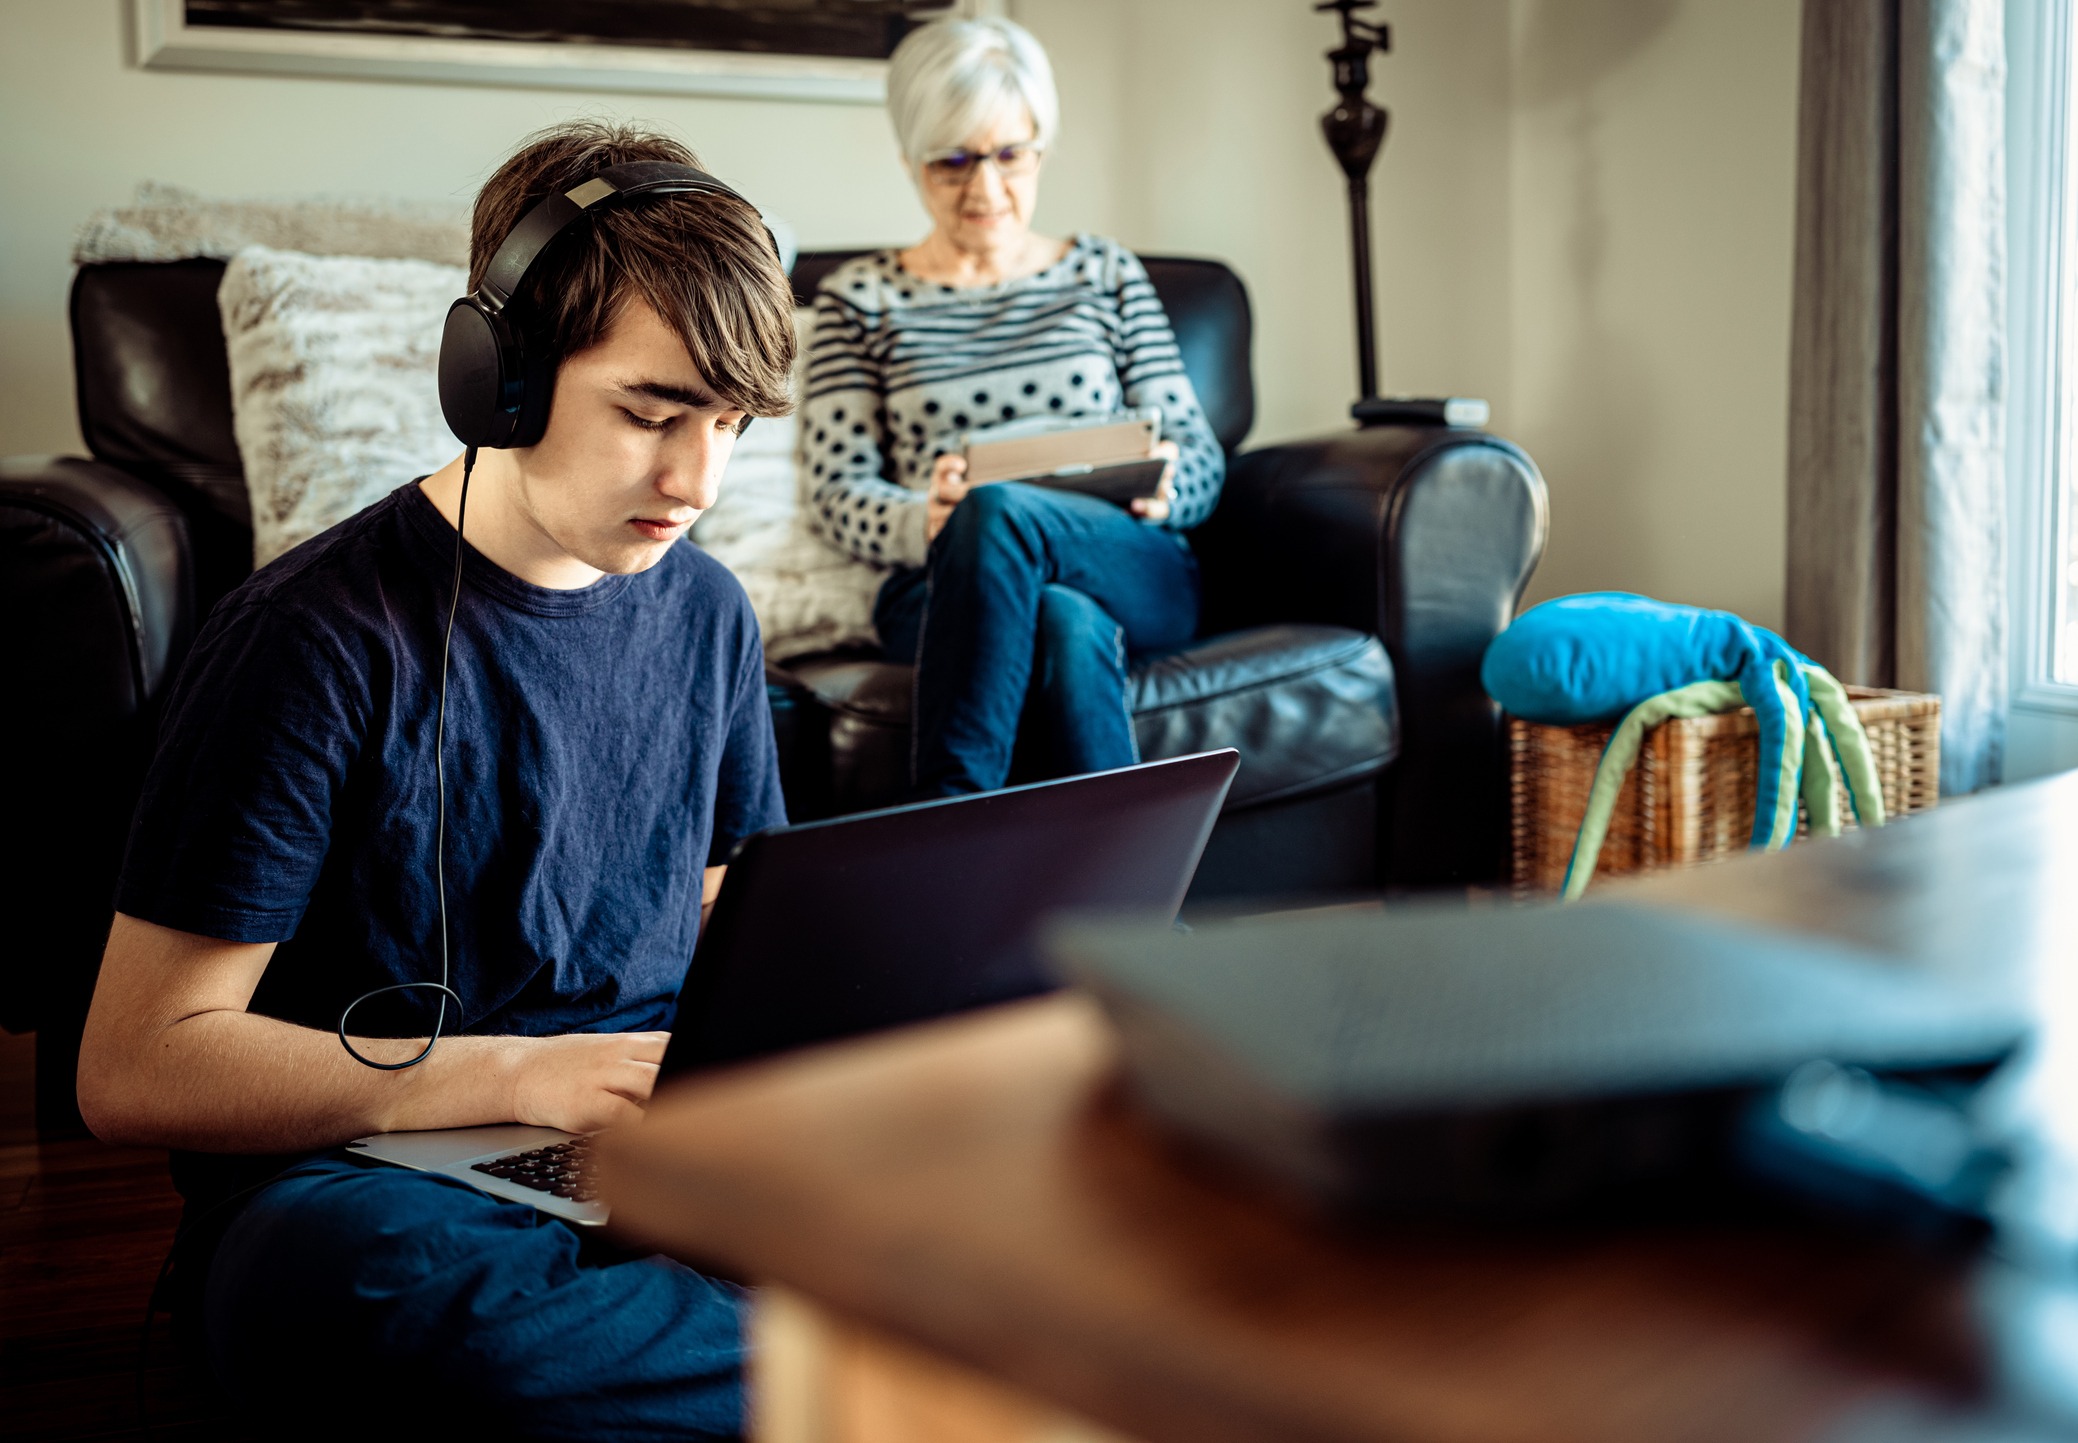 A teenager with headphones plugged into his laptop and an older woman using a tablet